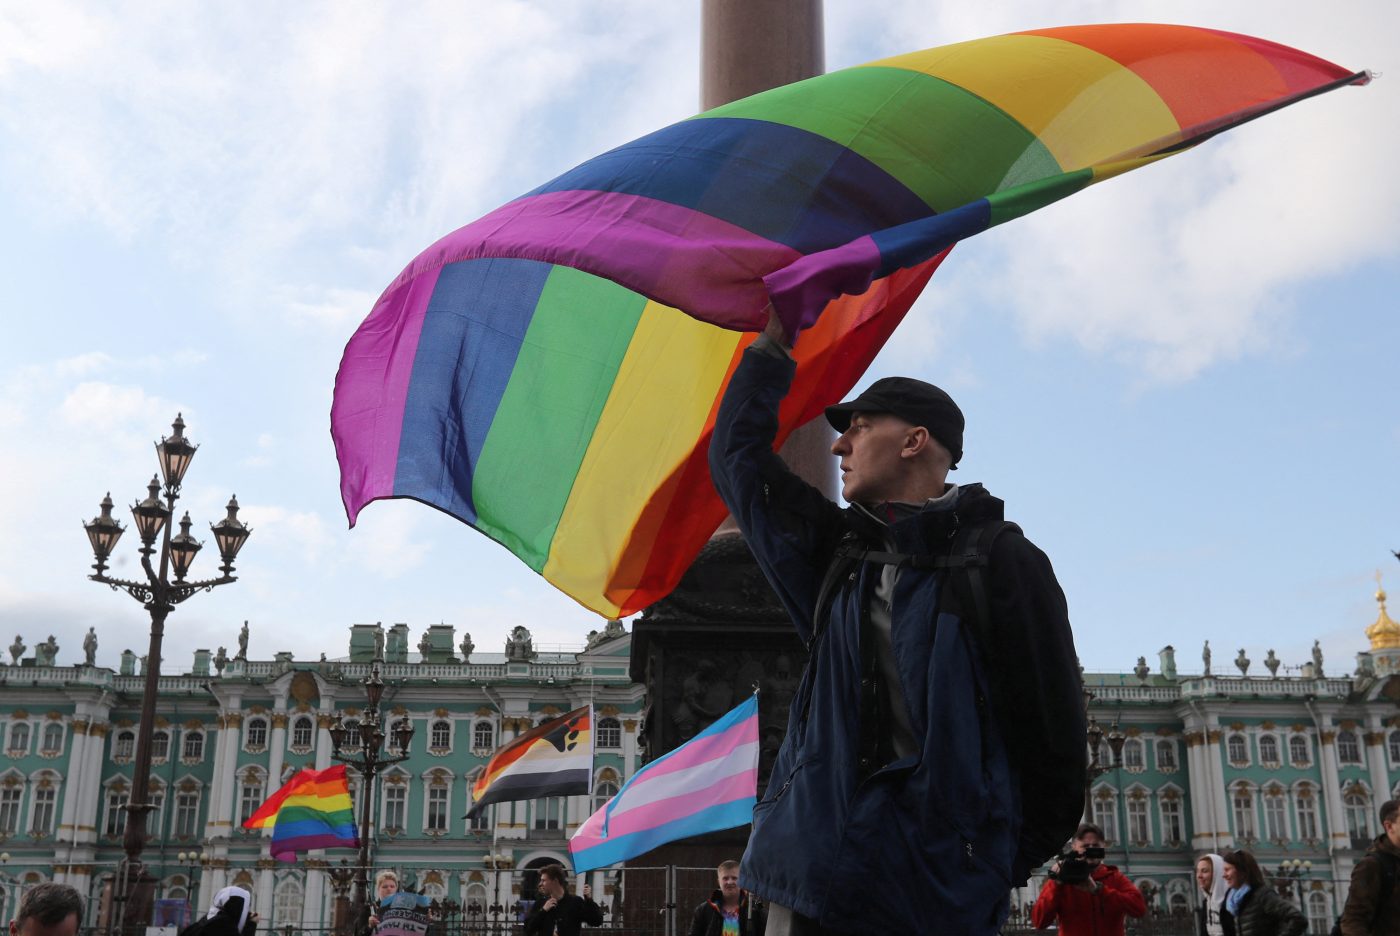 Photo: A participant waves a rainbow flag during the LGBT community rally "X St.Petersburg Pride" in central Saint Petersburg, Russia August 3, 2019. Credit: REUTERS/Anton Vaganov/File Photo